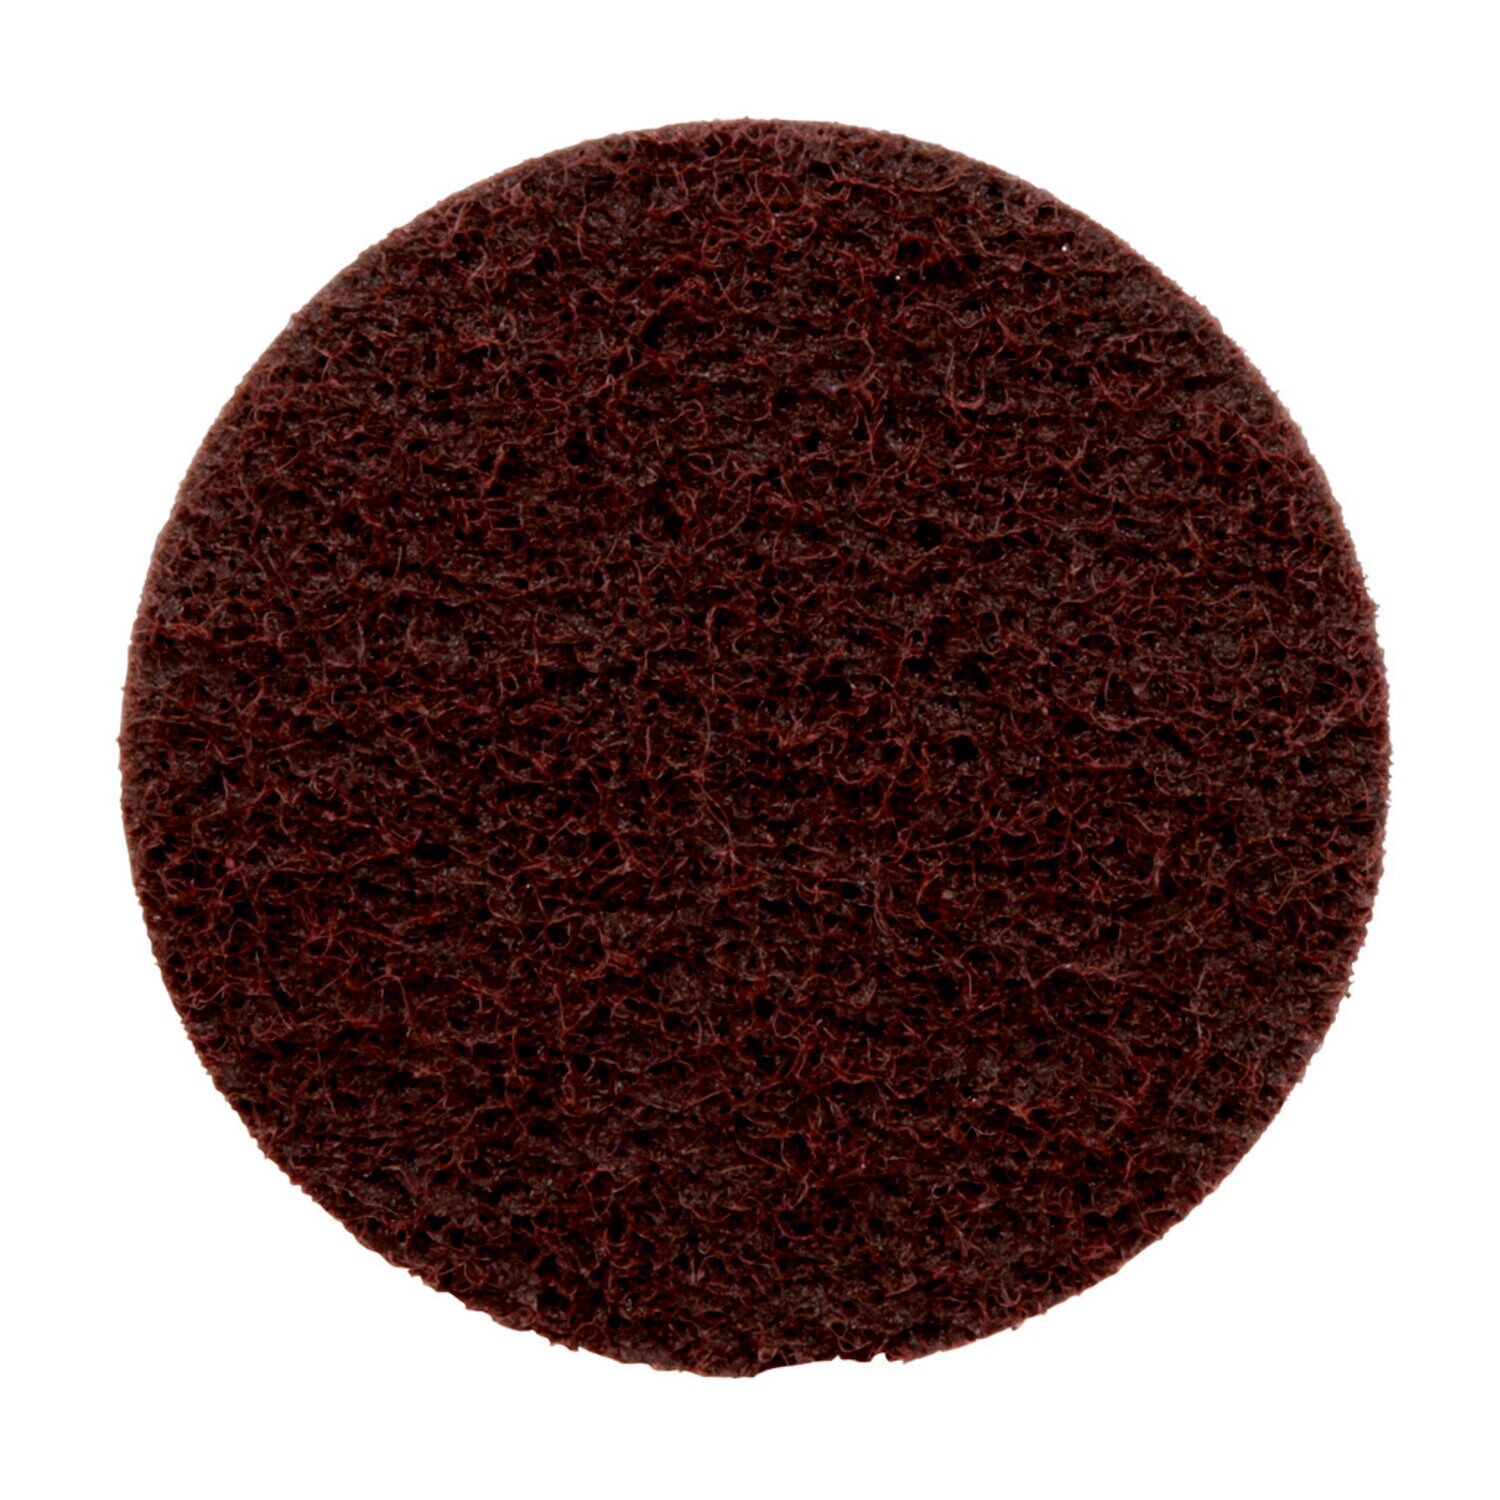 7000046878 - Standard Abrasives Quick Change Surface Conditioning RC Disc, 840485,
A/O MED, TR, Maroon, 3 in, Die Q300V, 25/Car, 250 ea/Case